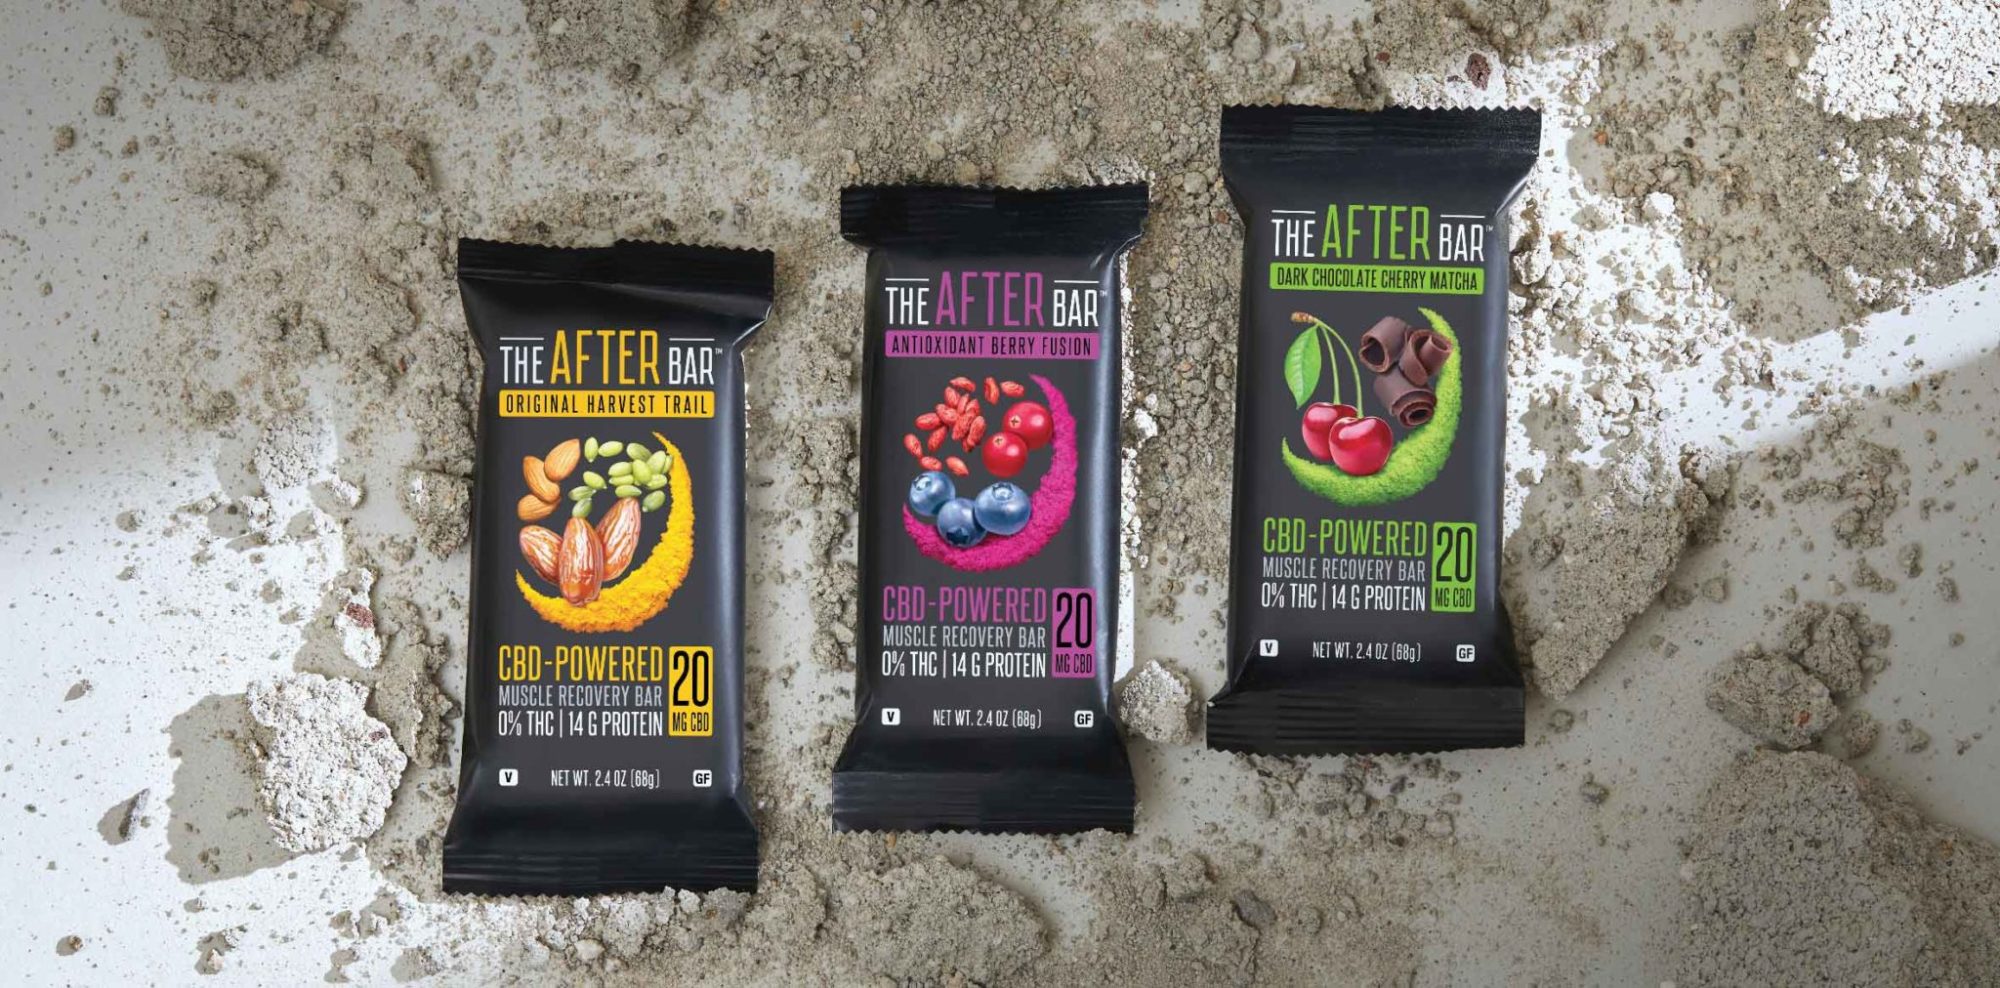 The After Bar Packaging